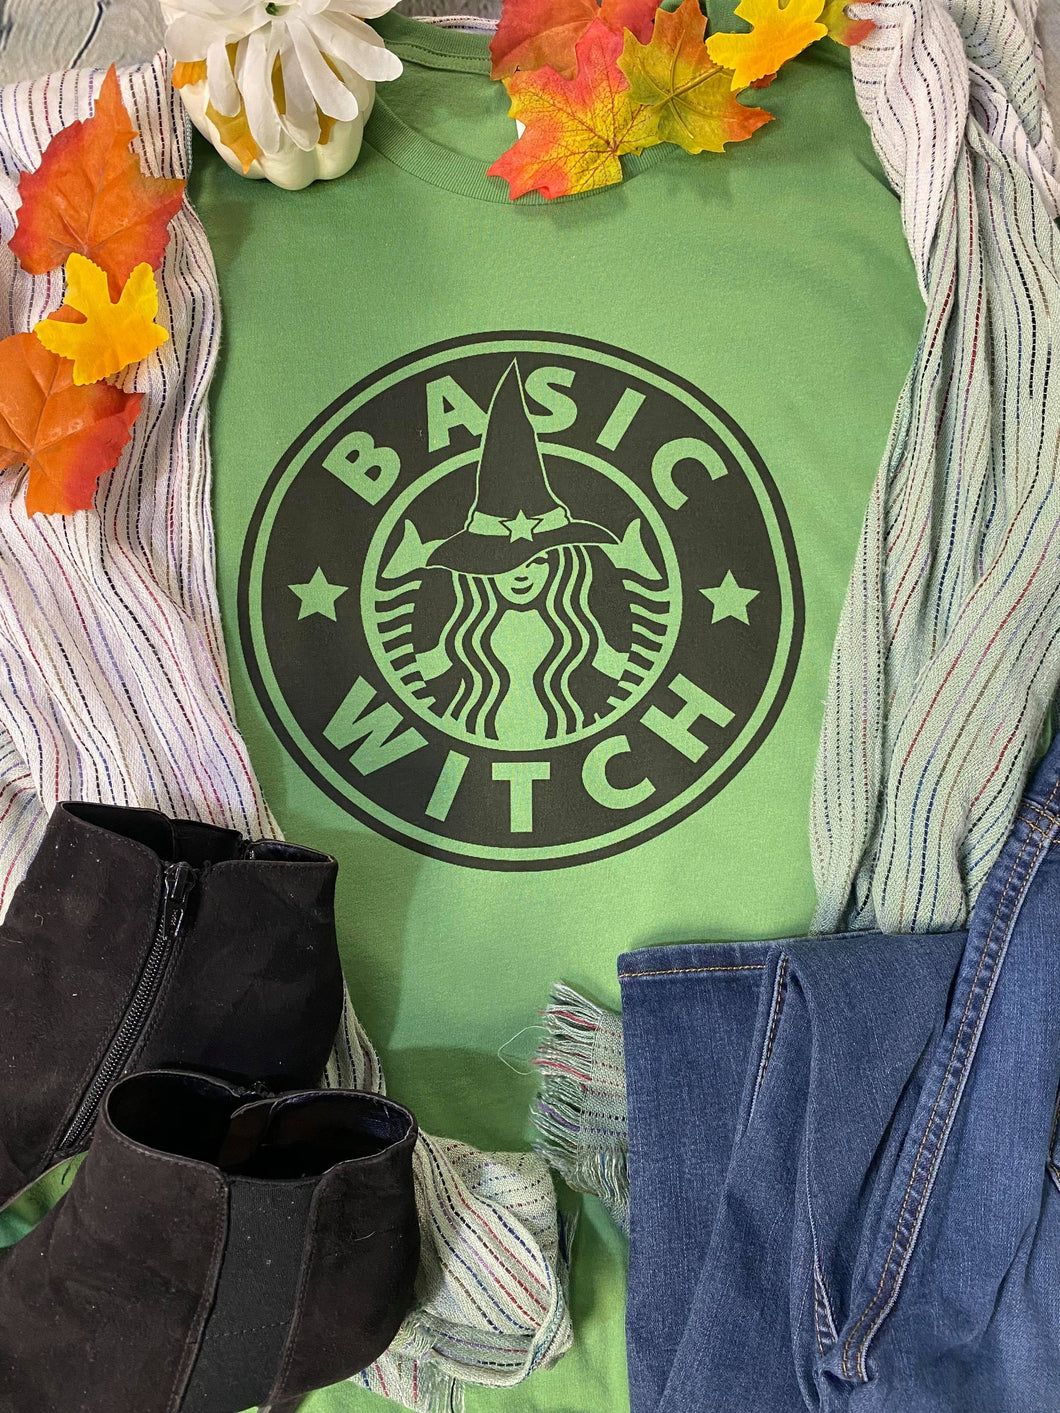 Basic witch apparel